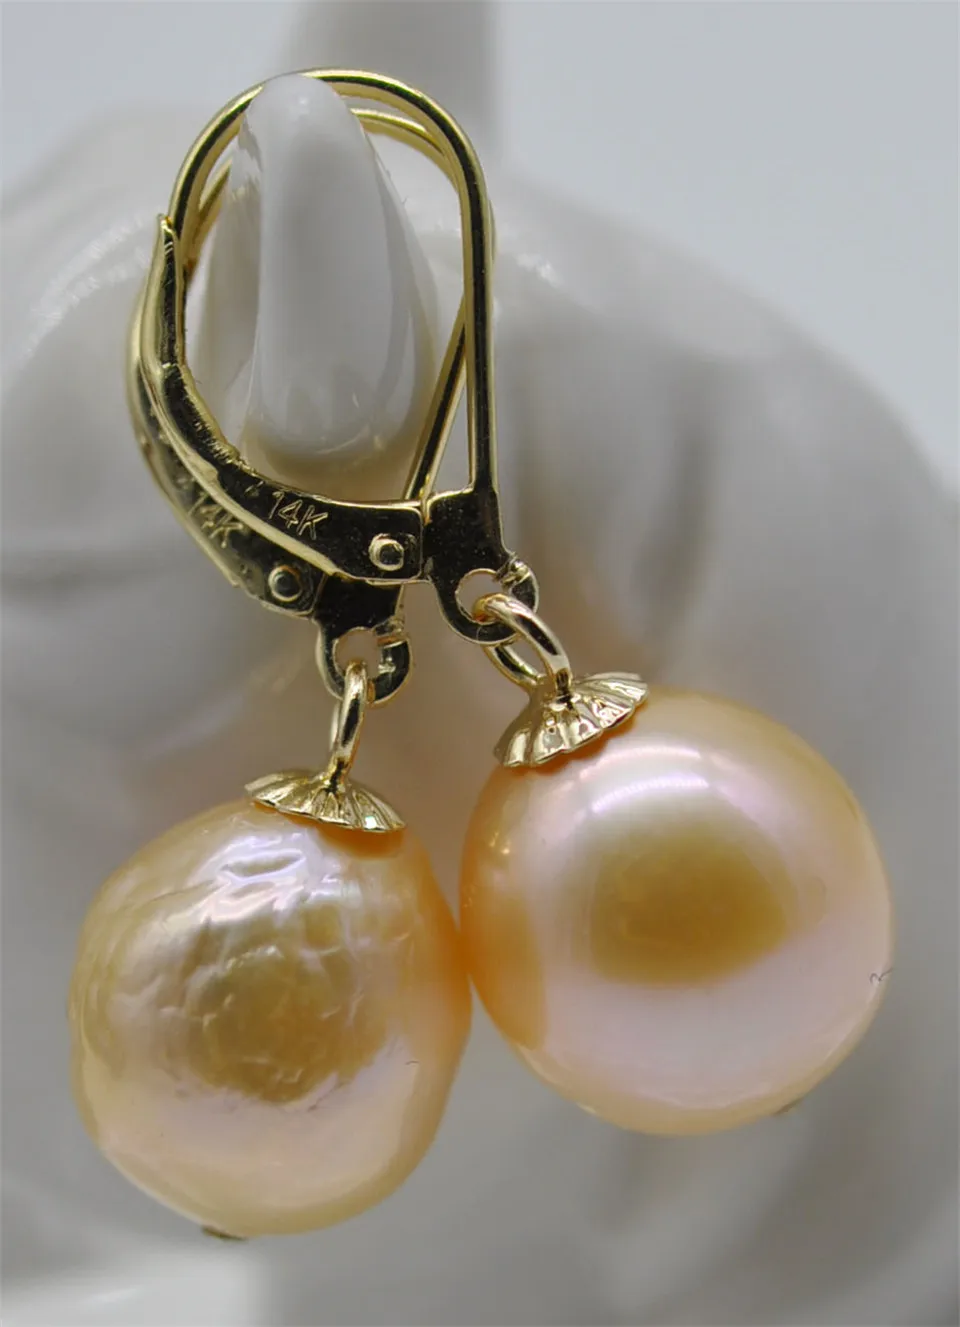 

HABITOO Gorgeous 12-13mm South Sea Baroque Gold Pink Pearl Earring 14k Earring Ladies Pearl Earrings Jewelry Gift for Women